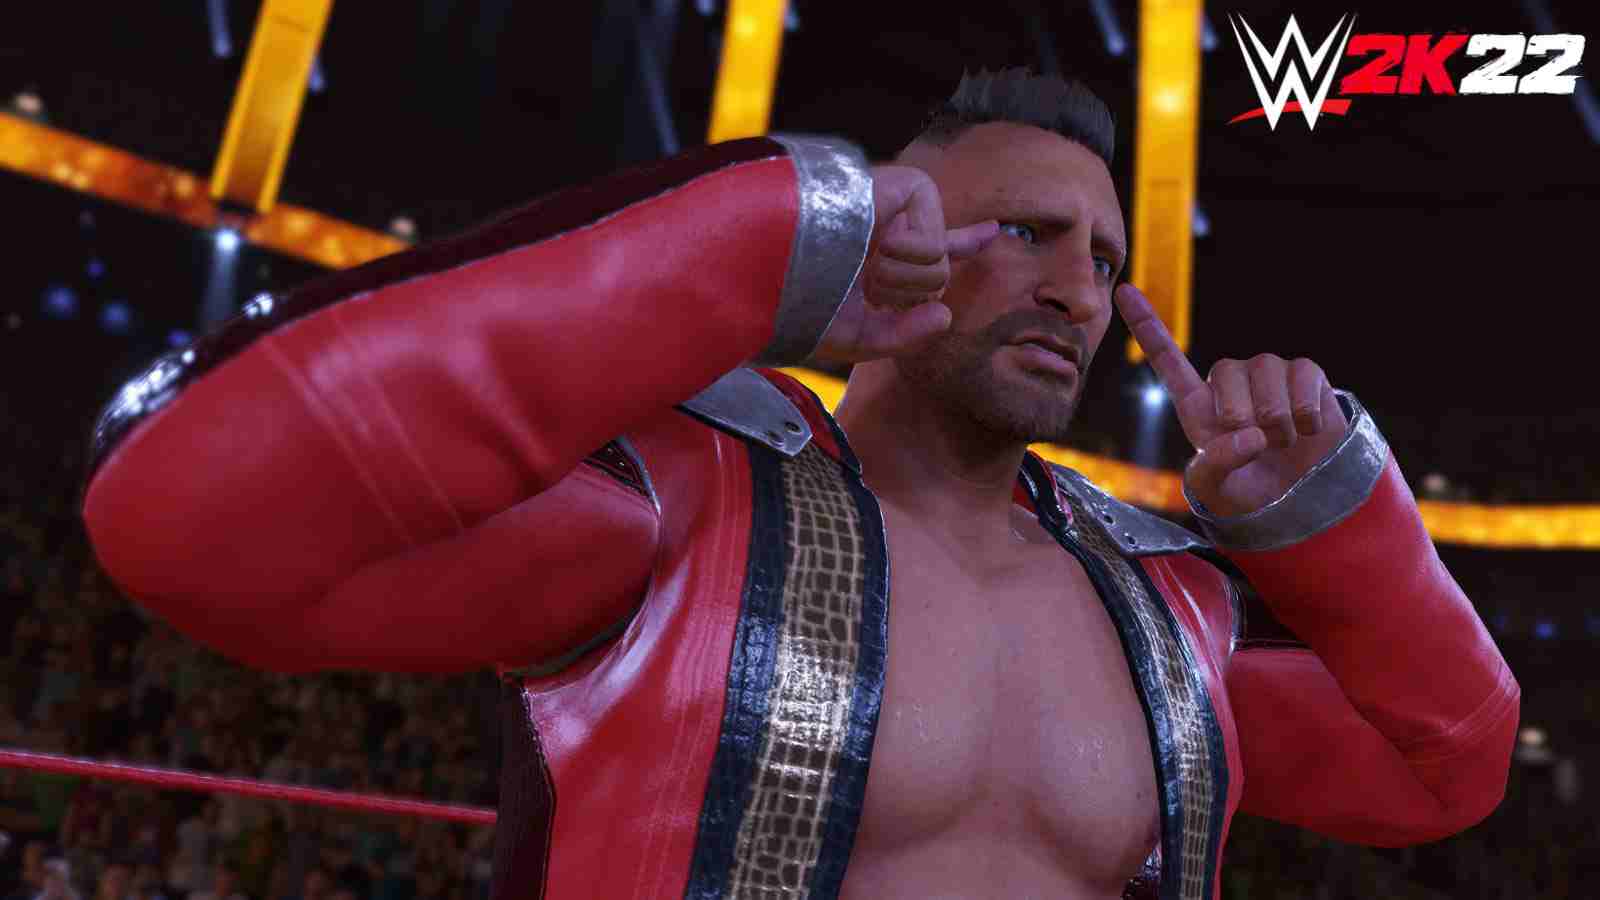 WWE 2K22 Patch 1.21 Notes (Version 1.021)